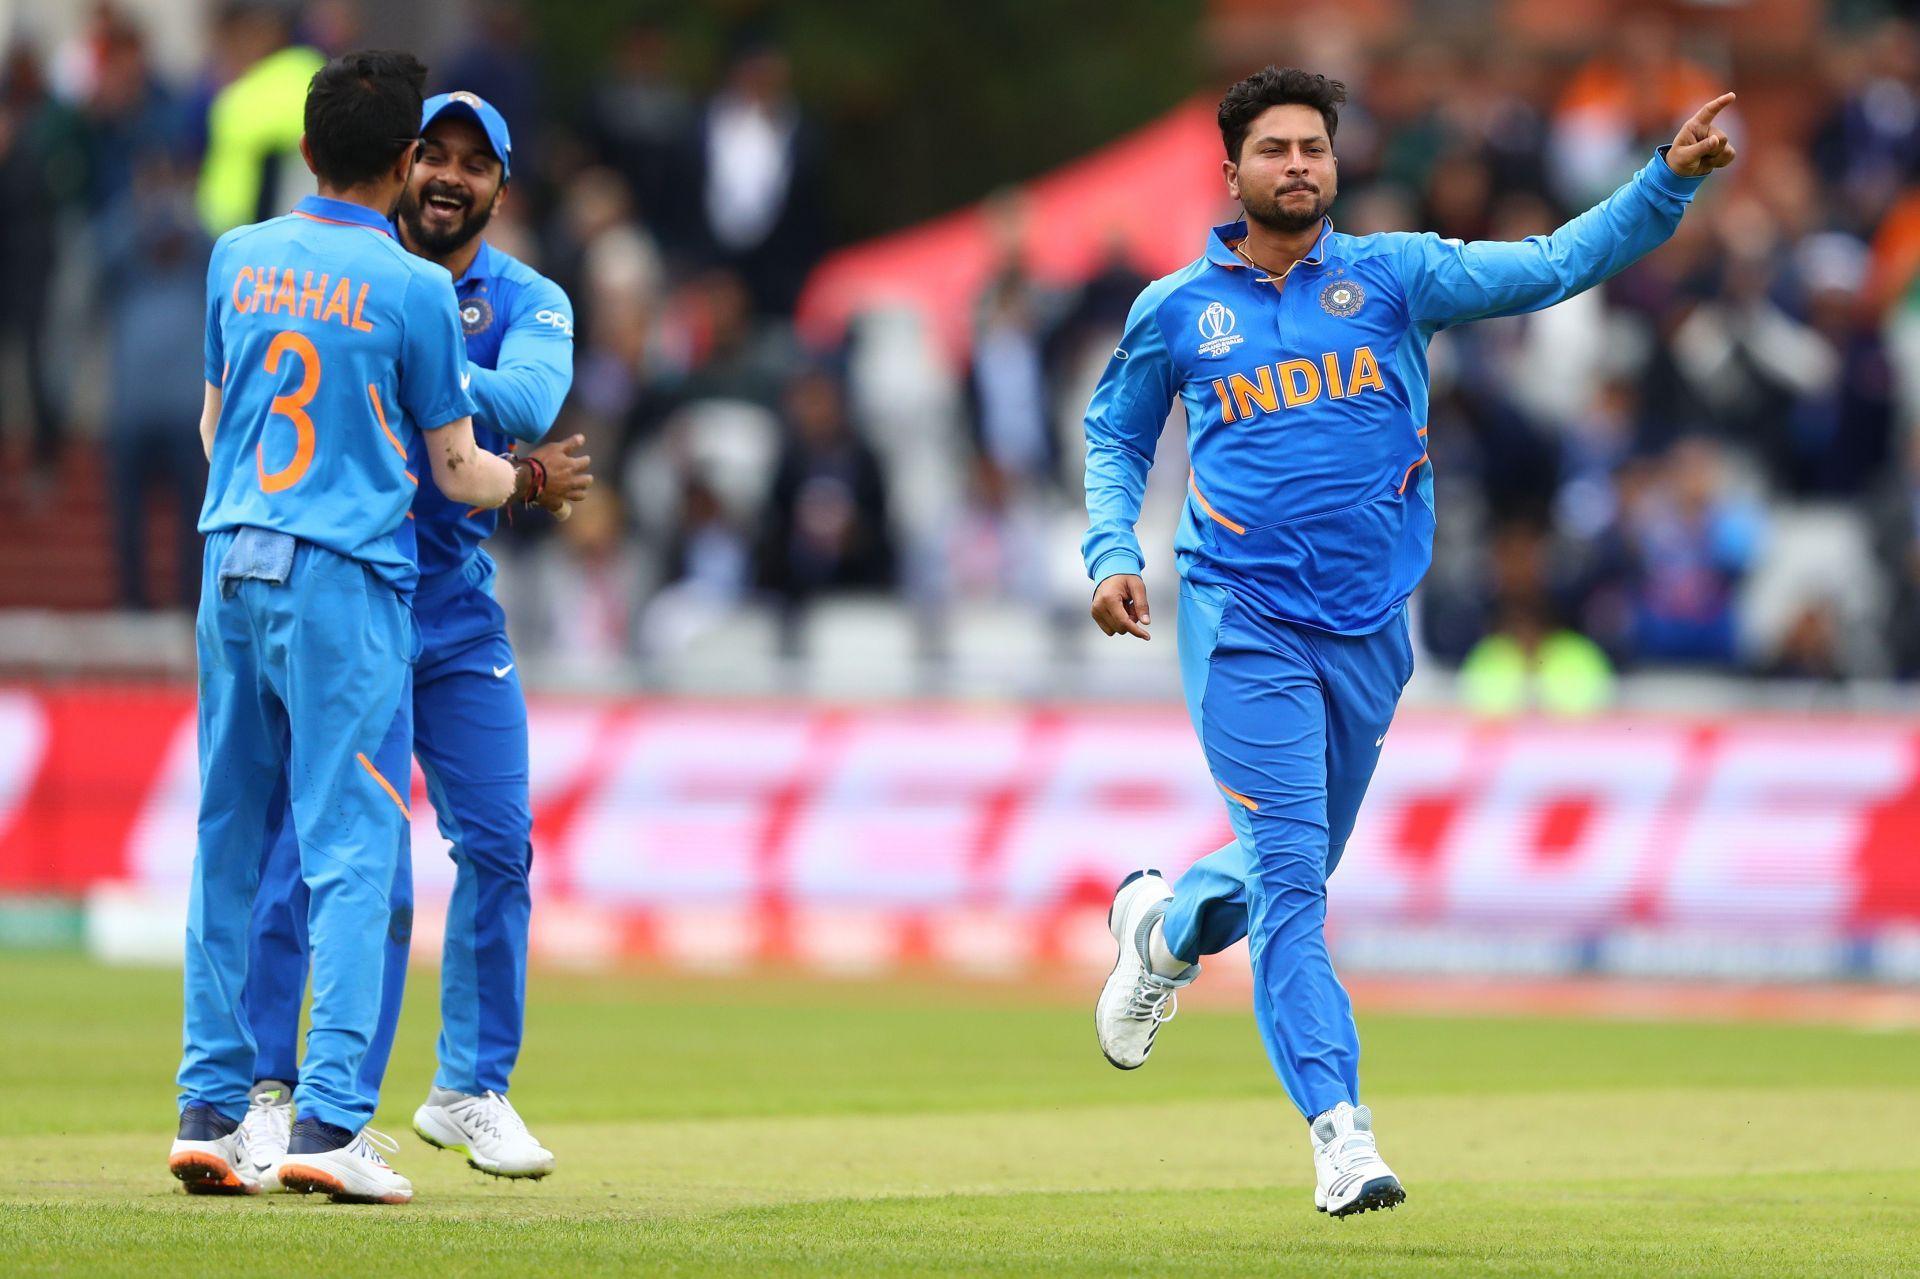 Kuldeep produced a magical ball to dismiss Babar the last time India and Pakistan met in an ICC event